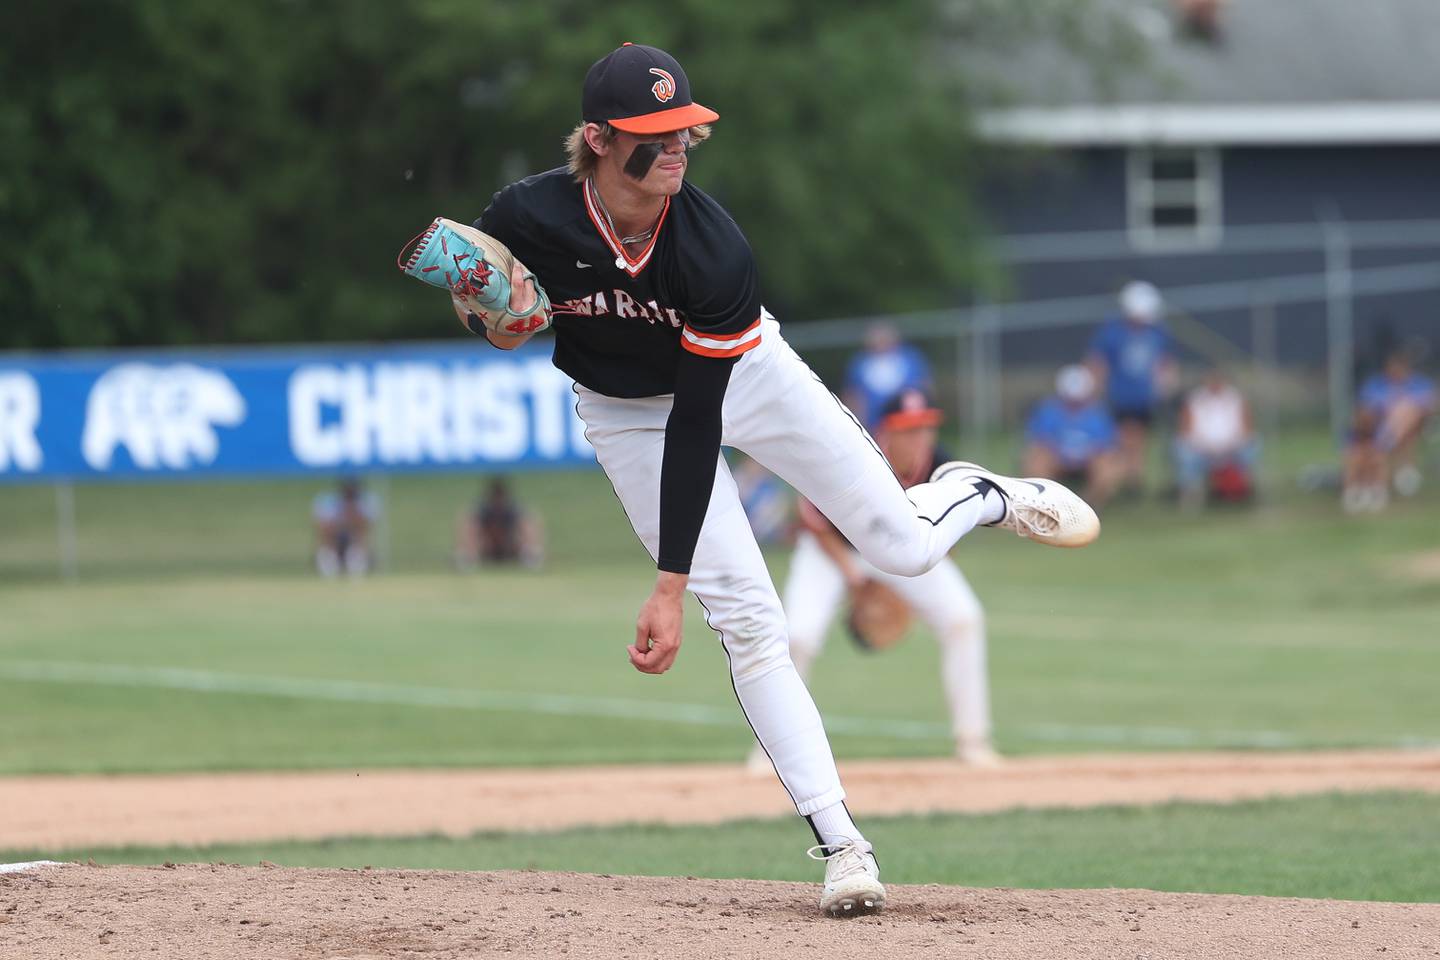 Lincoln-Way West’s Conor Essenburg follows through on a pitch against Lincoln-Way East in the Class 4A Lockport Sectional semifinal on Thursday, June 1, 2023 in Lockport.